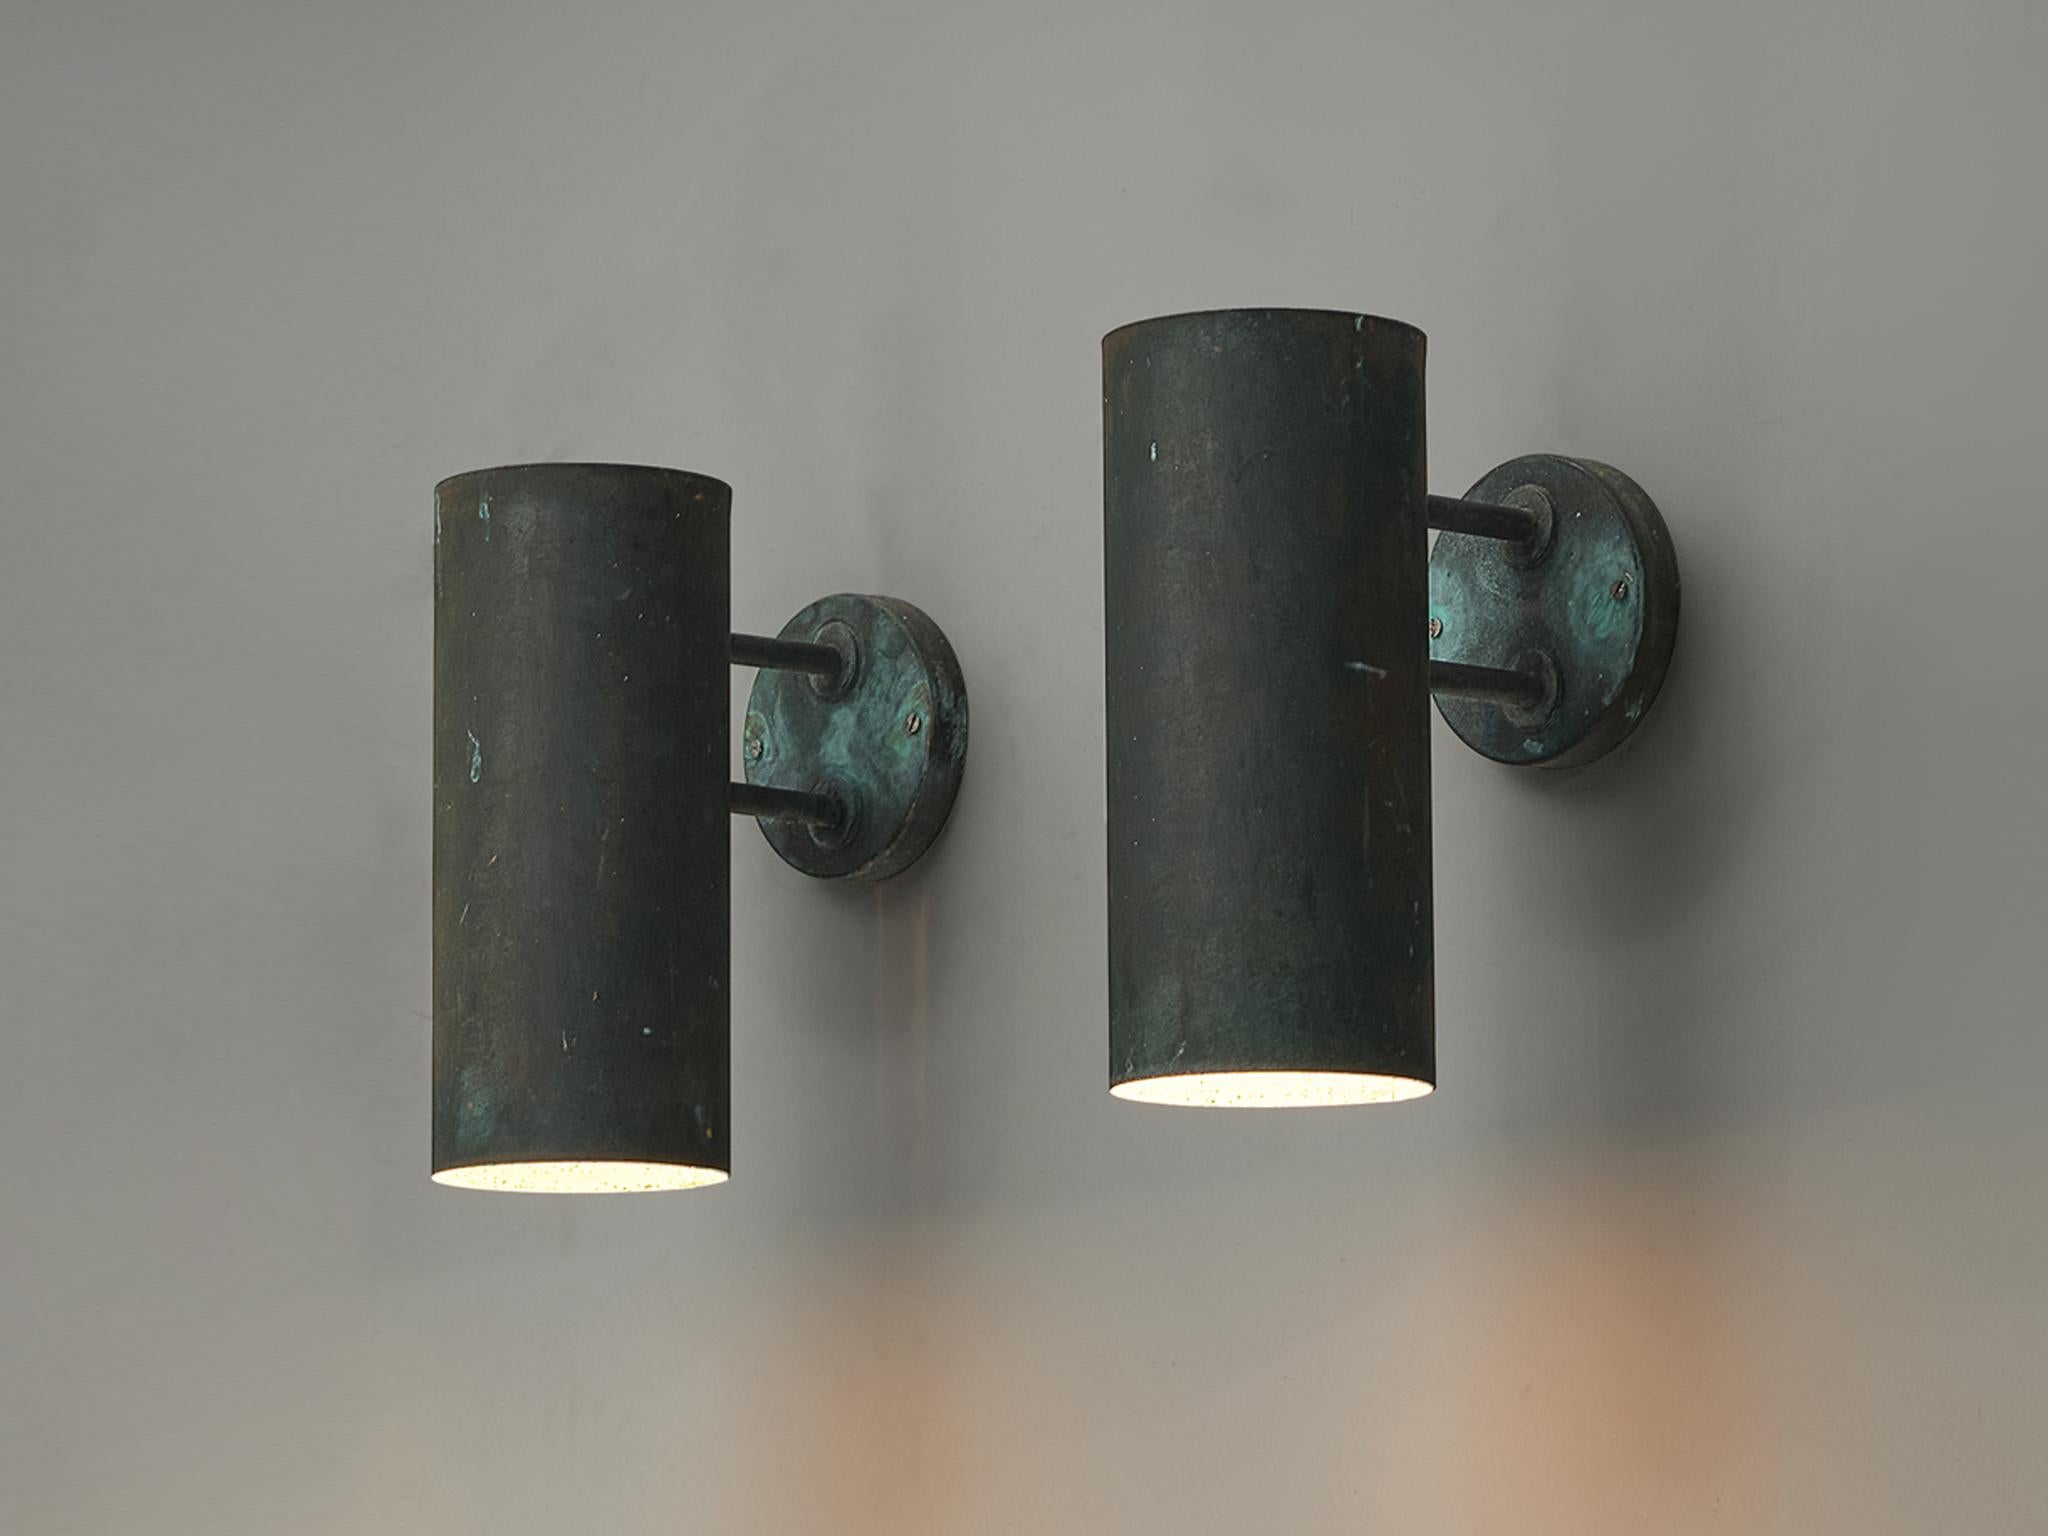 Hans-Agne Jakobsson for Hans-Agne Jakobsson AB in Markaryd, ‘Rulle’ wall lights, copper, Sweden, 1960s

The ‘Rulle’ outdoor lights by Swedish designer Hans-Agne Jakobsson feature a cylindric lampshade that is connected to a circular fixation. The